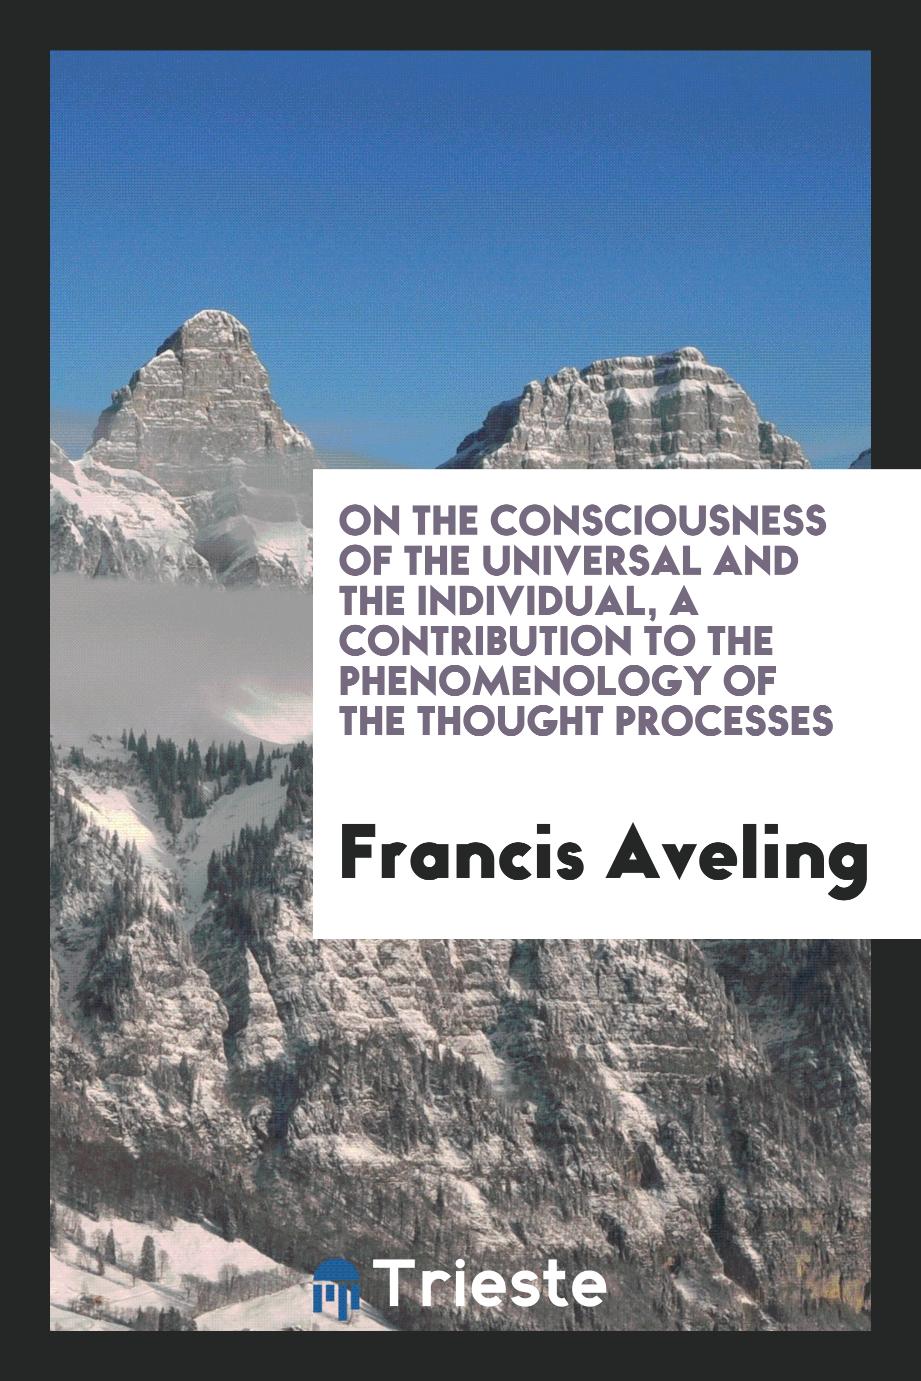 On the consciousness of the universal and the individual, a contribution to the phenomenology of the thought processes